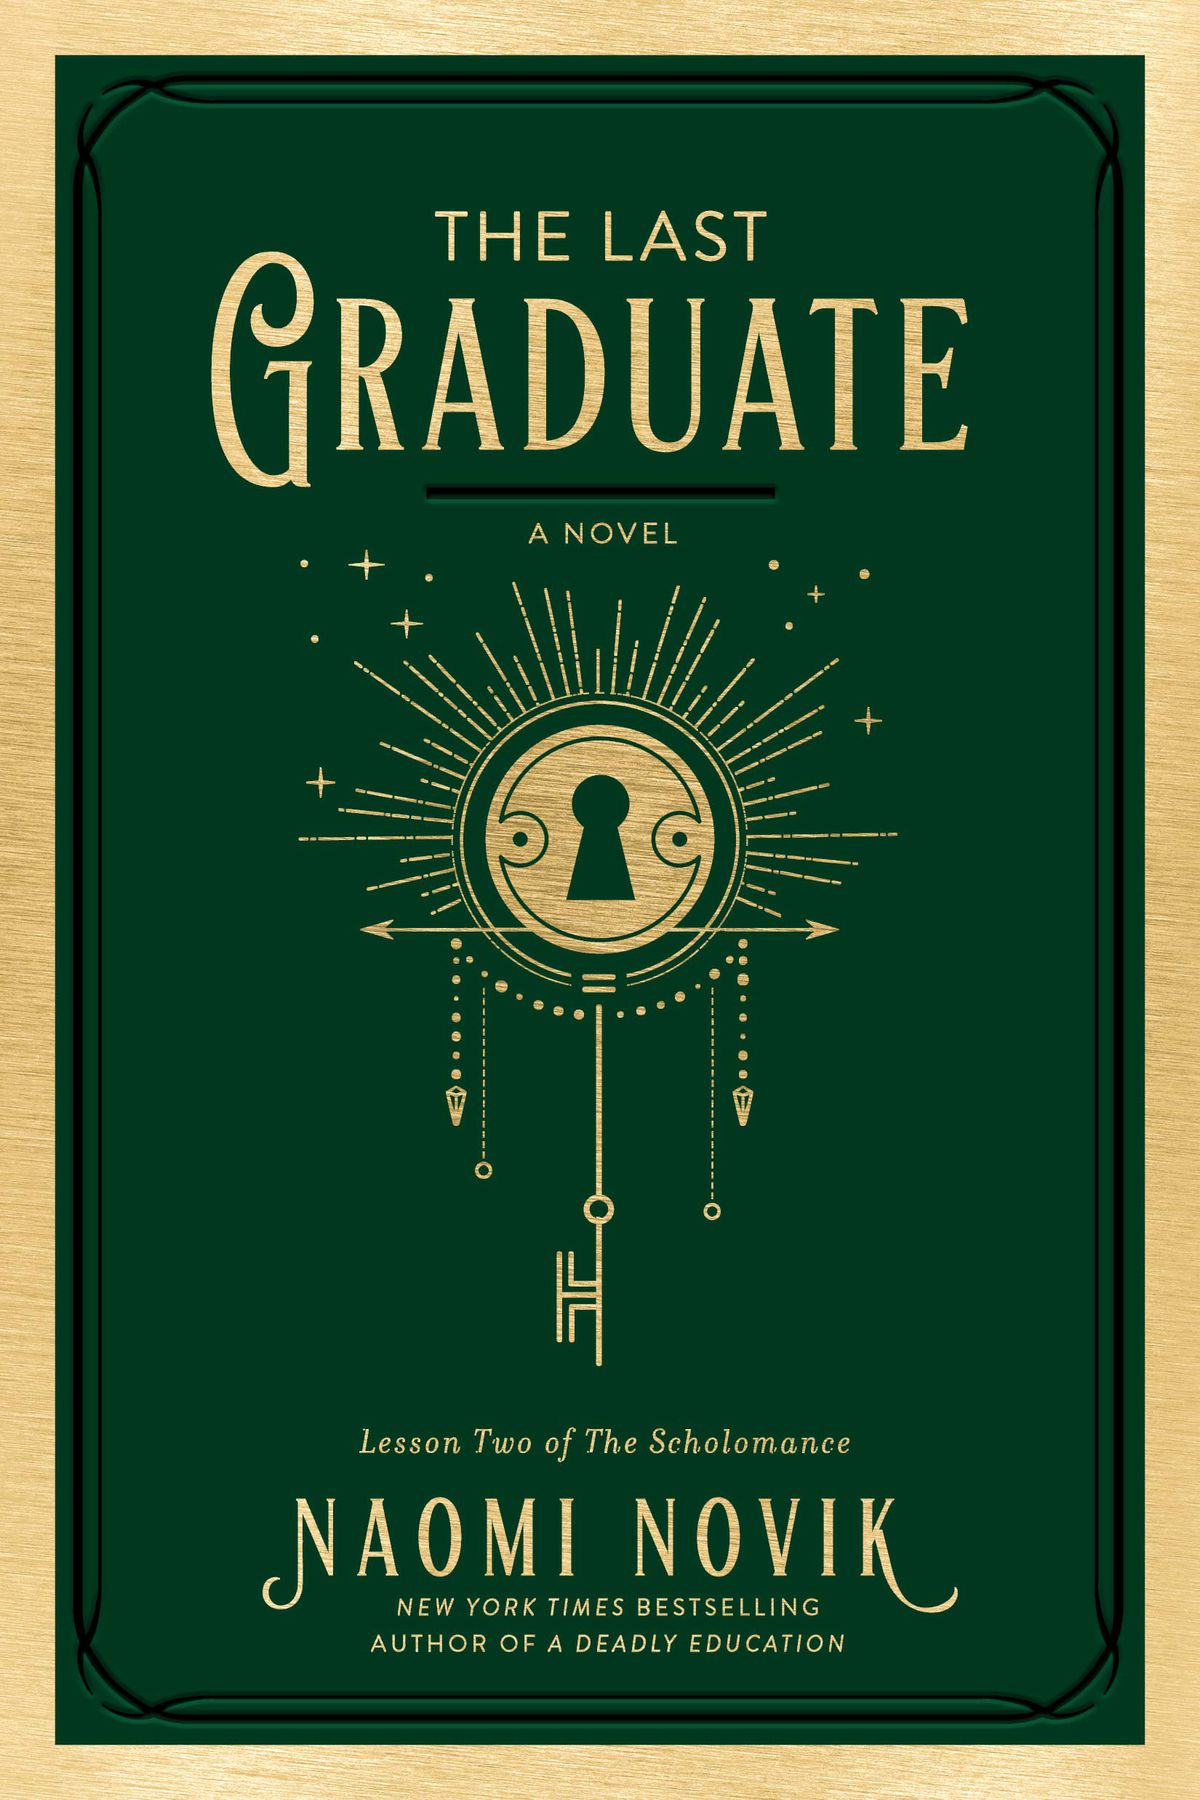 A cover for “The Last Graduate” by Naomi Novik showing a magical looking golden key against a dark green backdrop